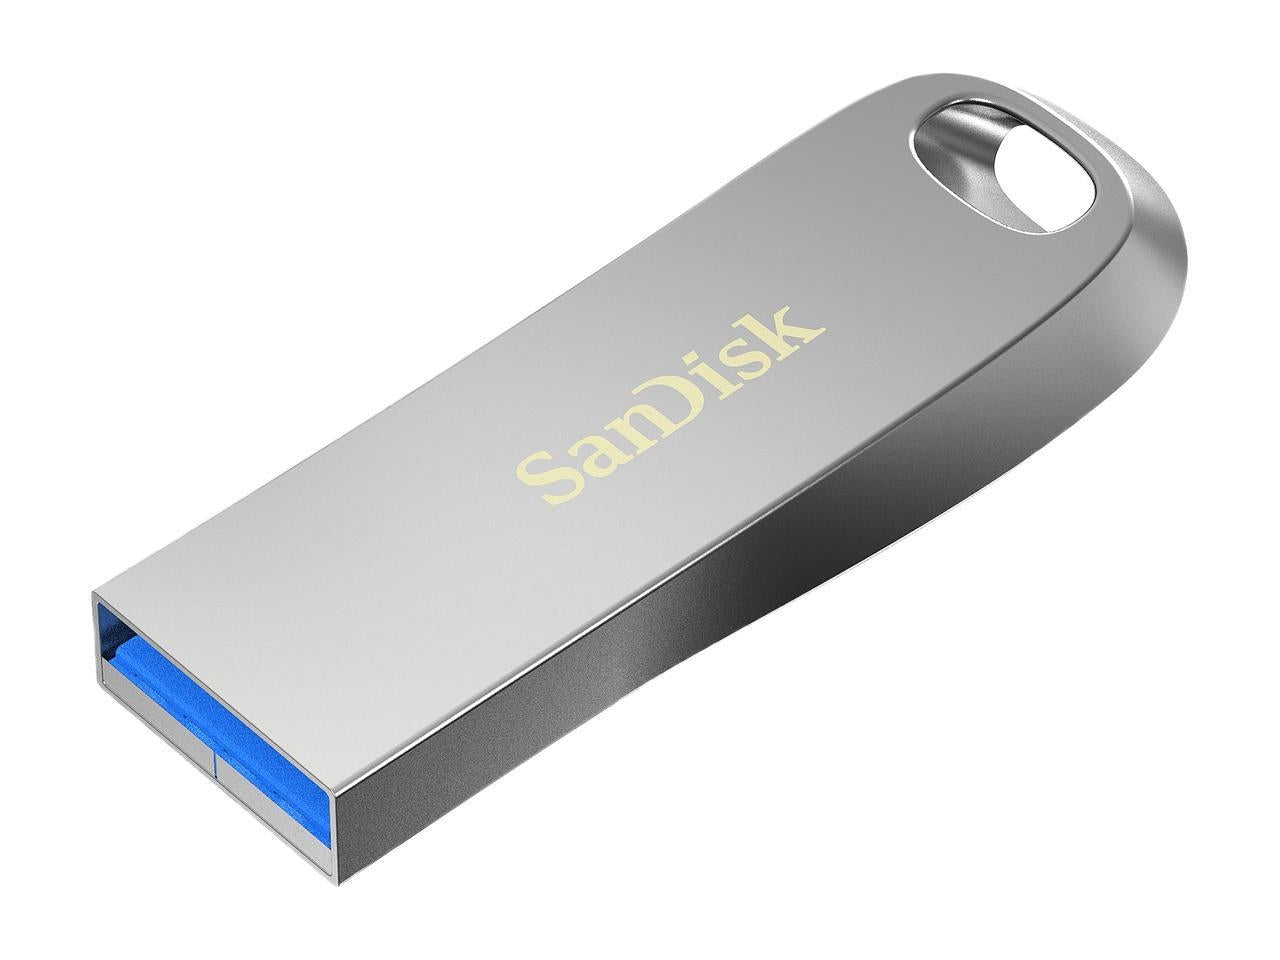 SANDISK SDCZ74-128G-G46 128G ULTRA LUXE PEN DRIVE 150MB USB 3.0 METAL | Auzzi Store